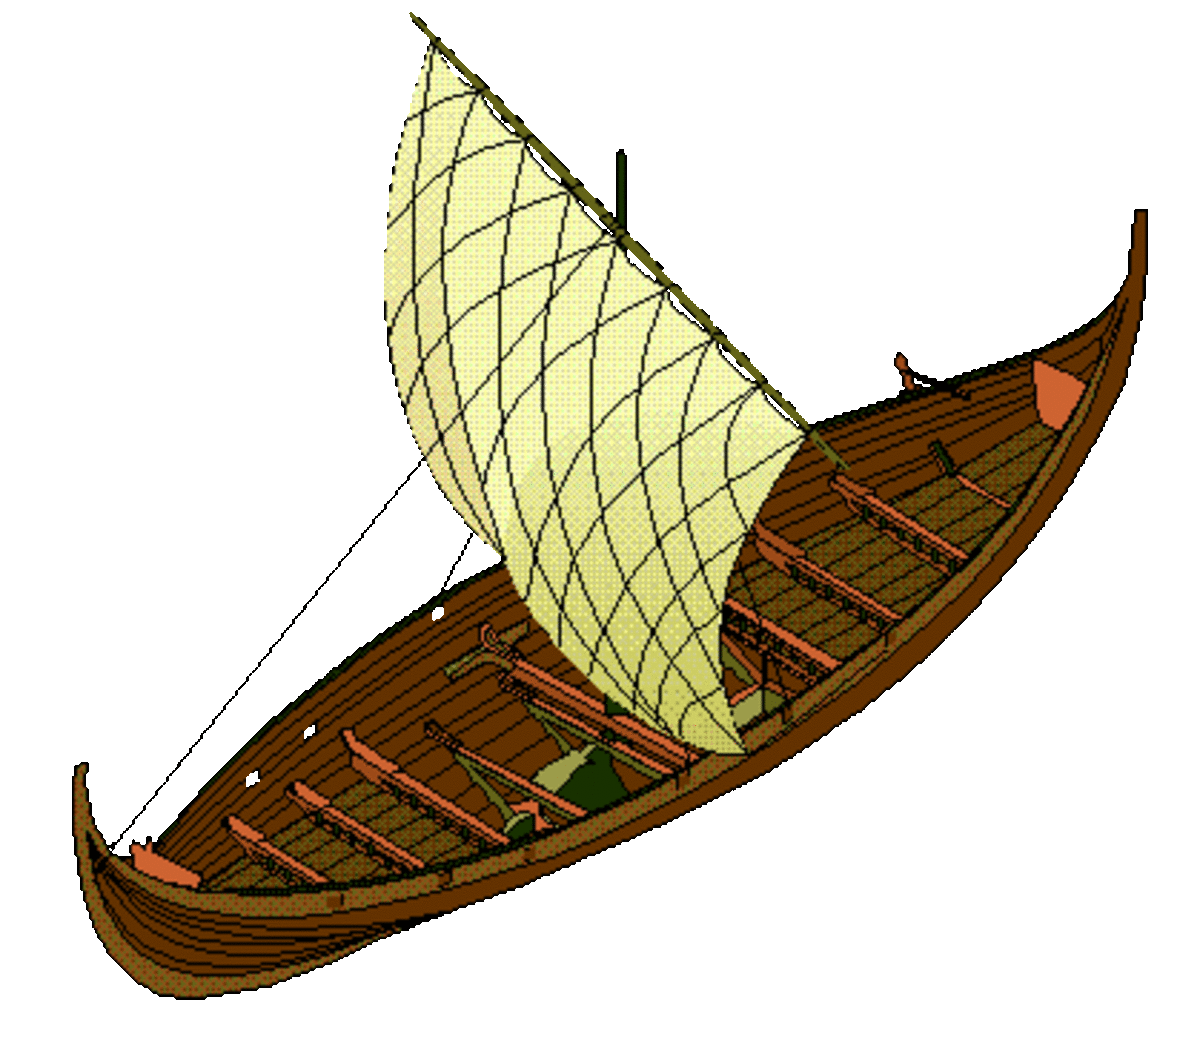 An overview of a smaller knarr, or trading ship with deeper draught than a longship